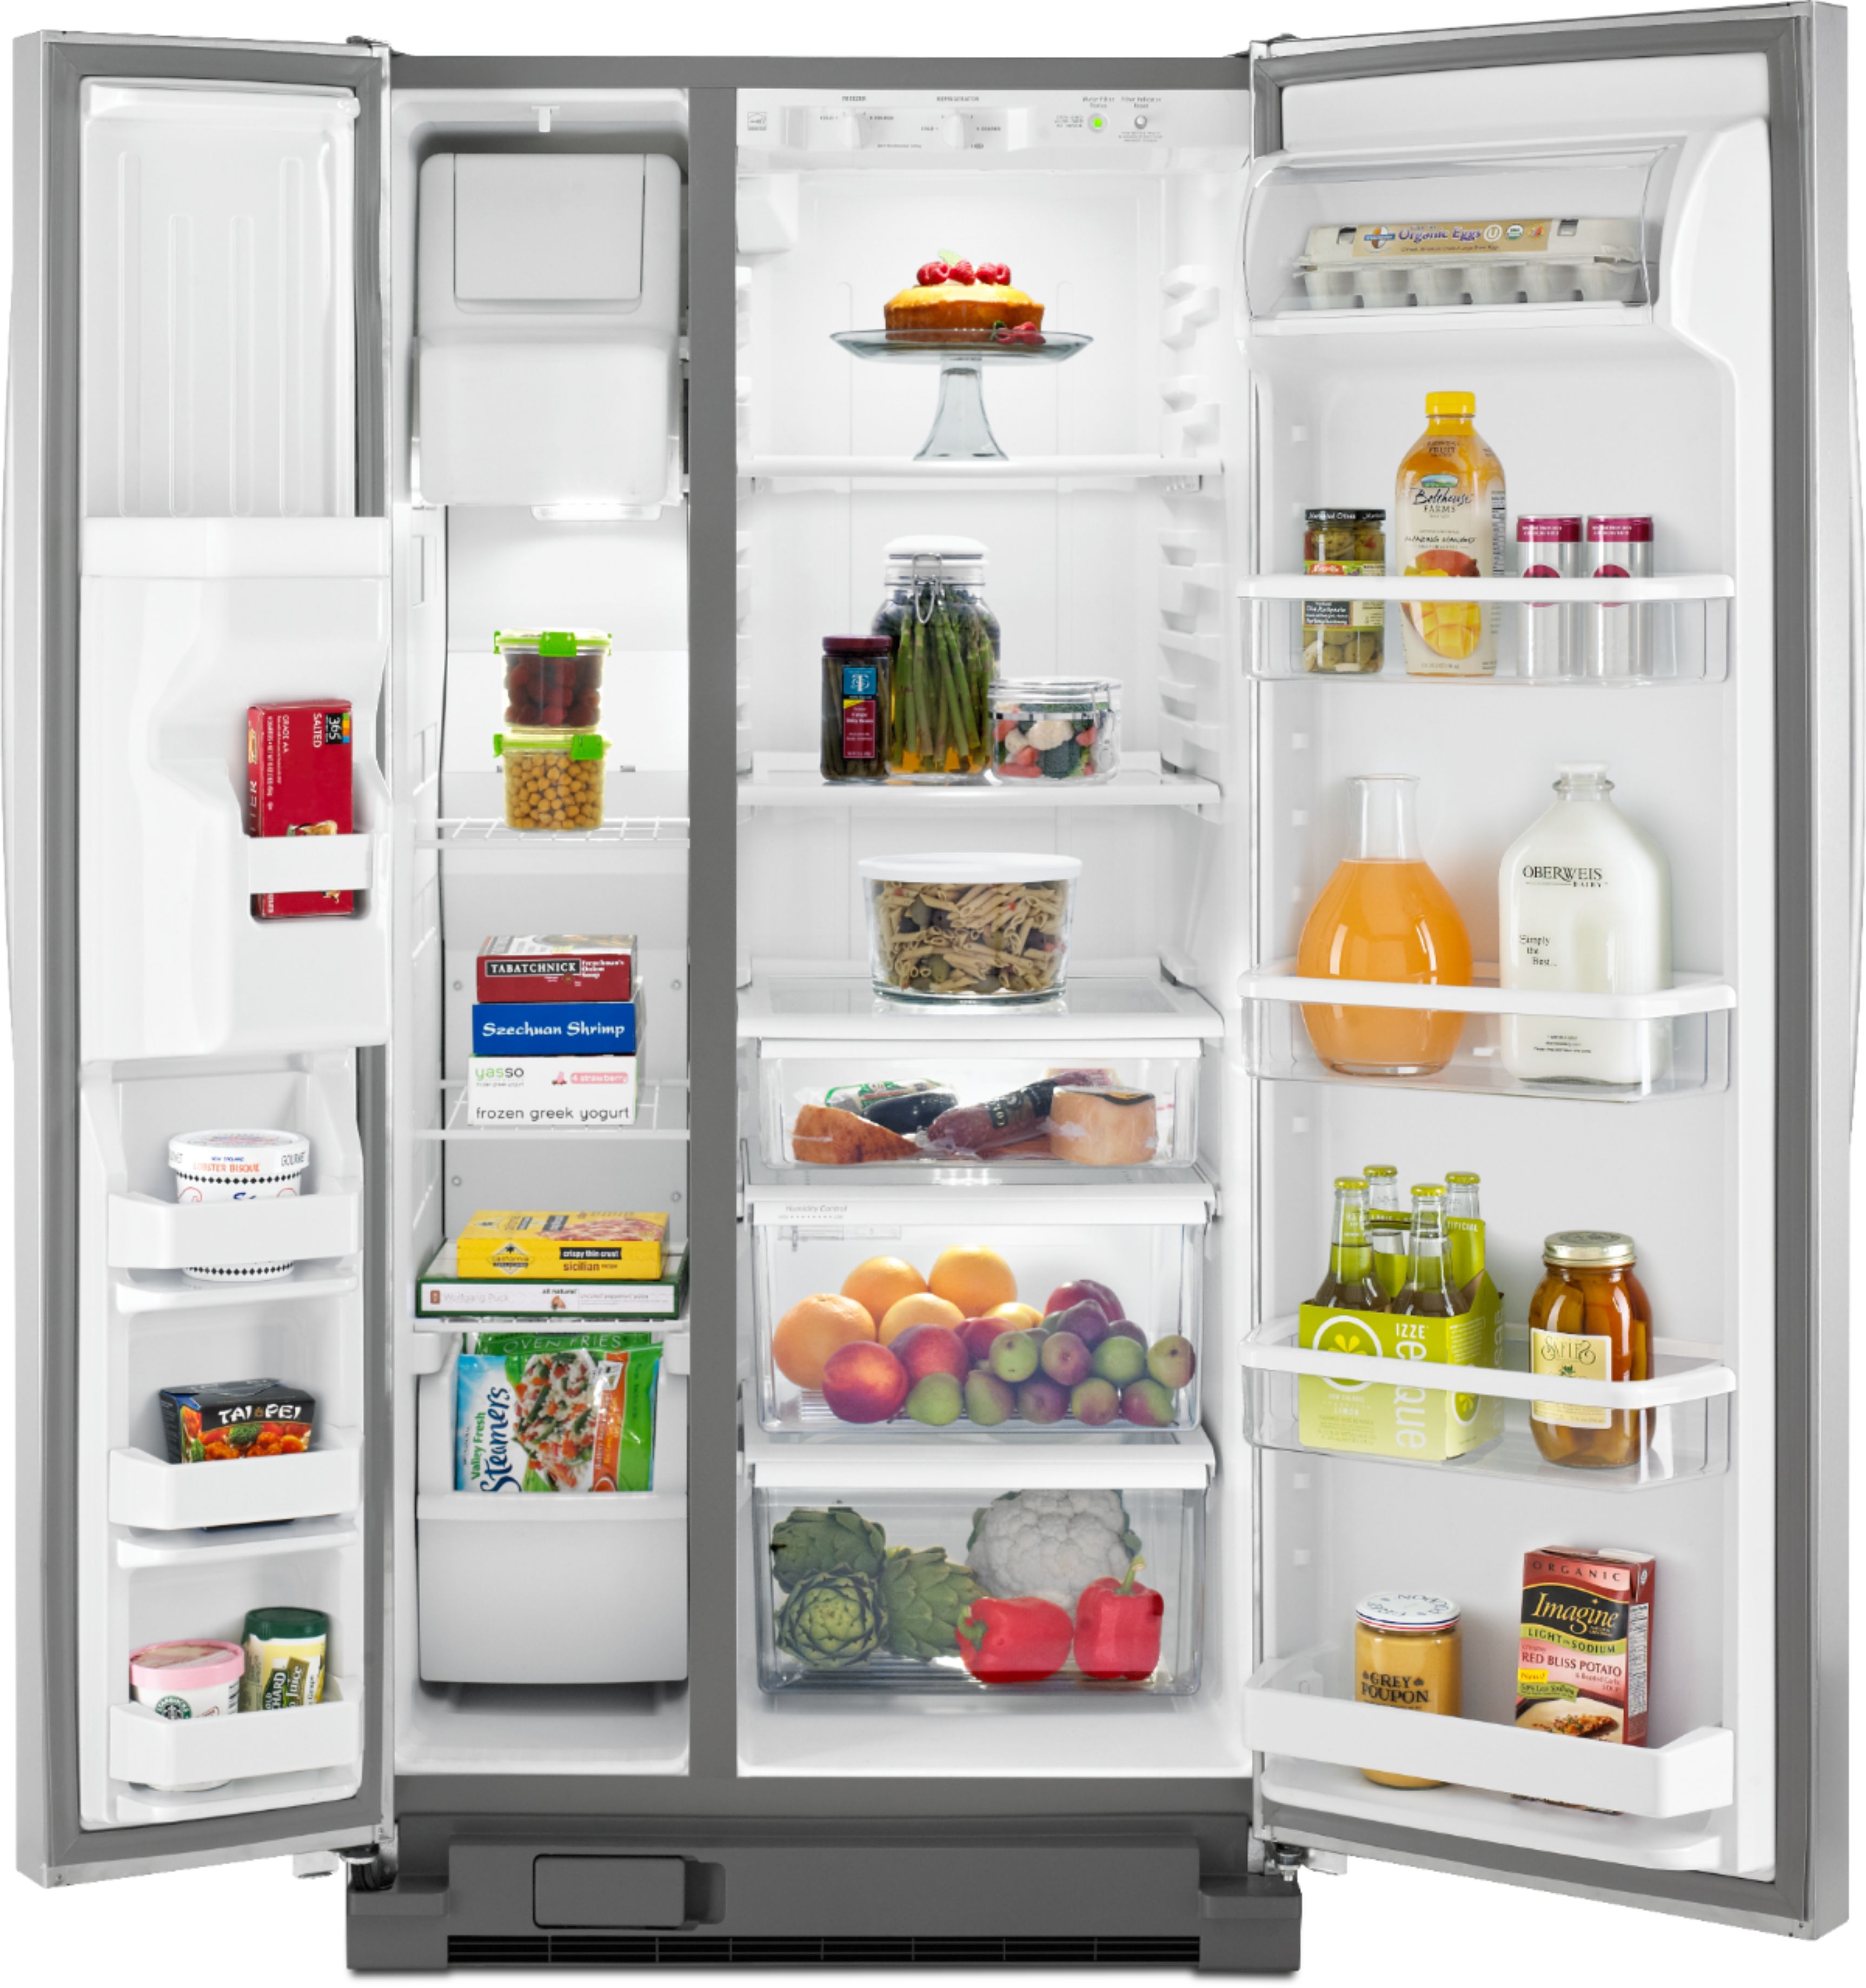 Customer Reviews: Whirlpool 21.2 Cu. Ft. Side-by-Side Refrigerator with ...